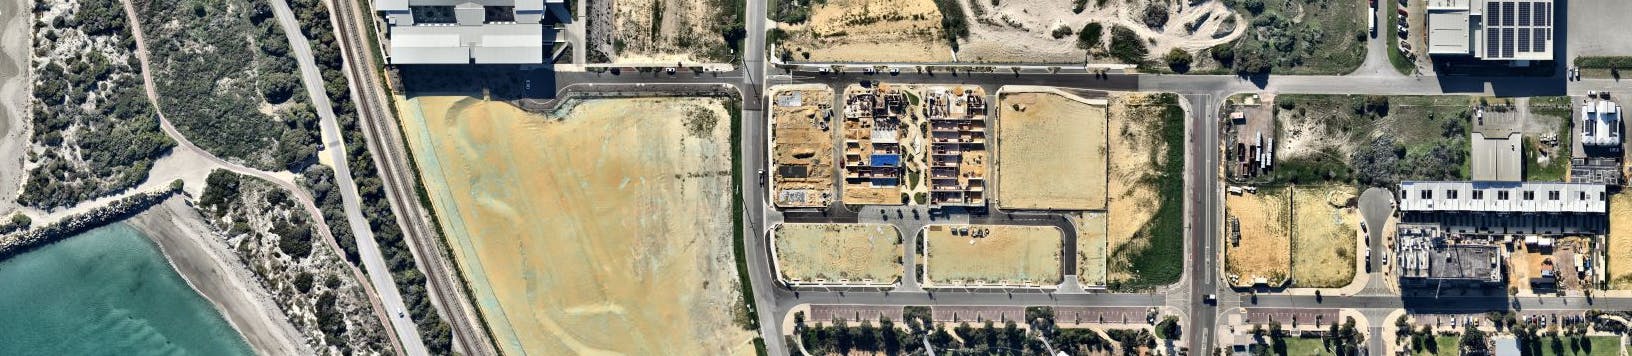 Arial photo of the subject site